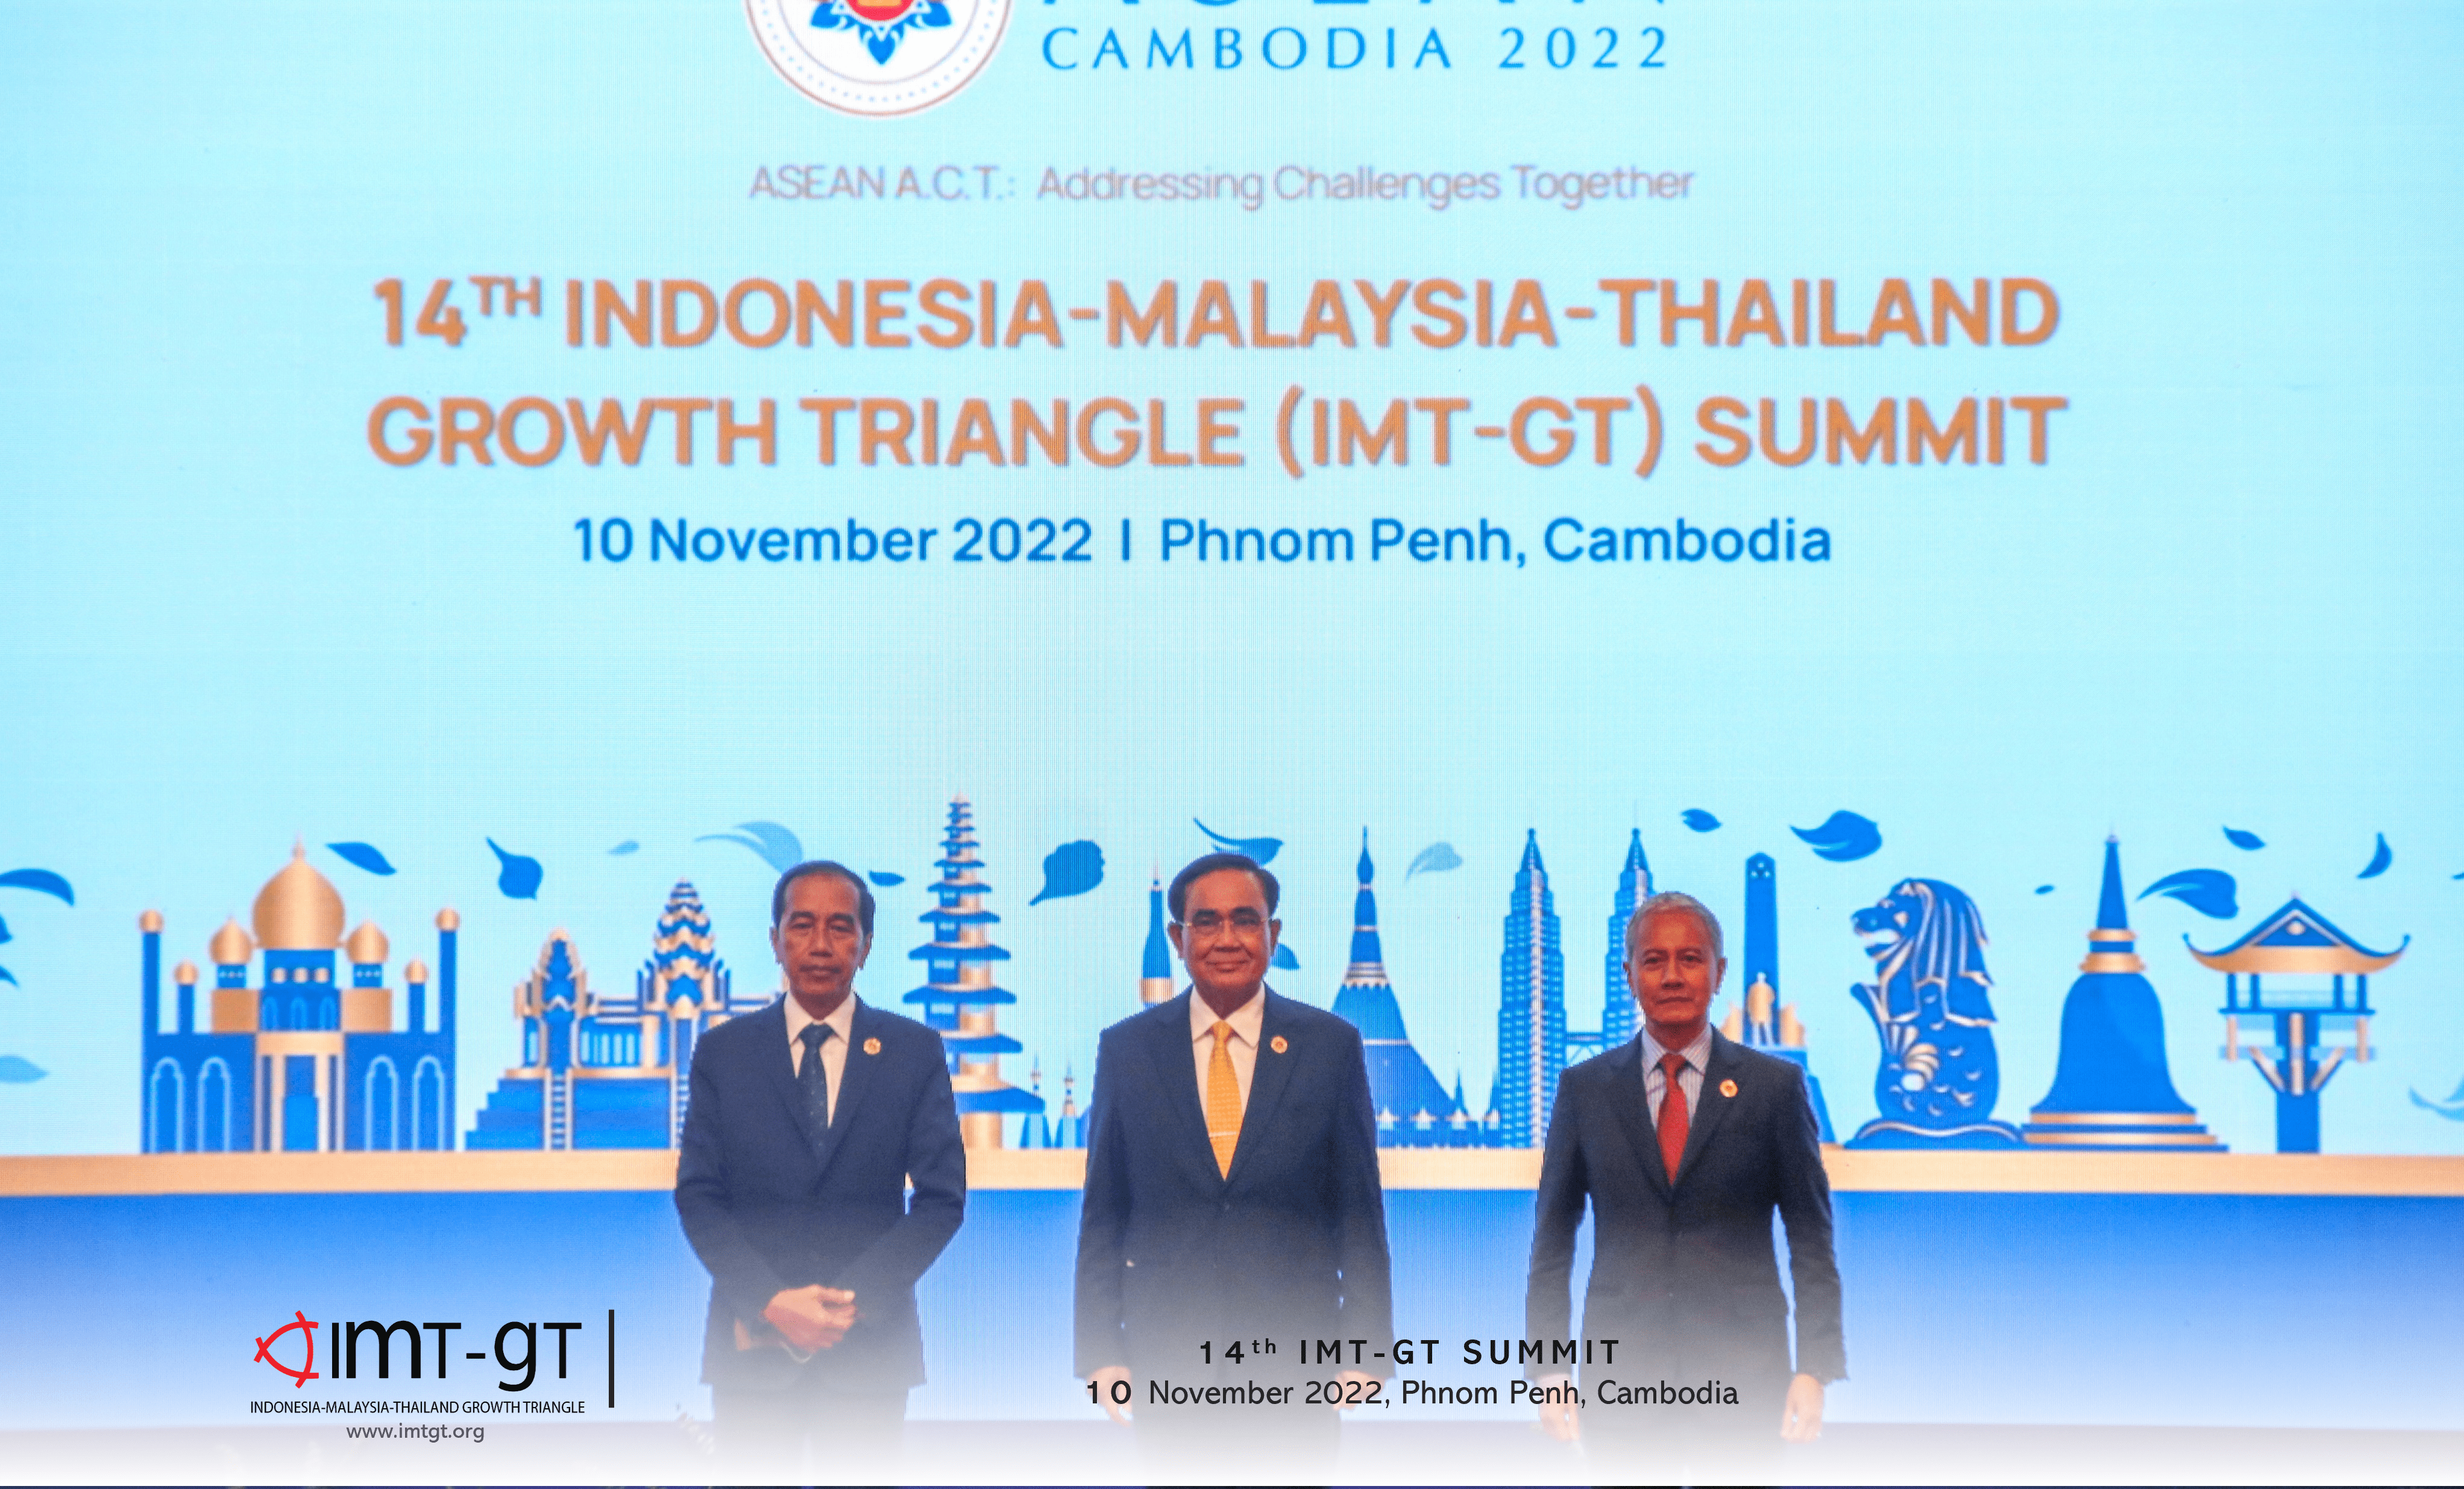 LEADERS’ JOINT STATEMENT FOR THE 14TH IMT-GT SUMMIT IN PHNOM PENH, CAMBODIA